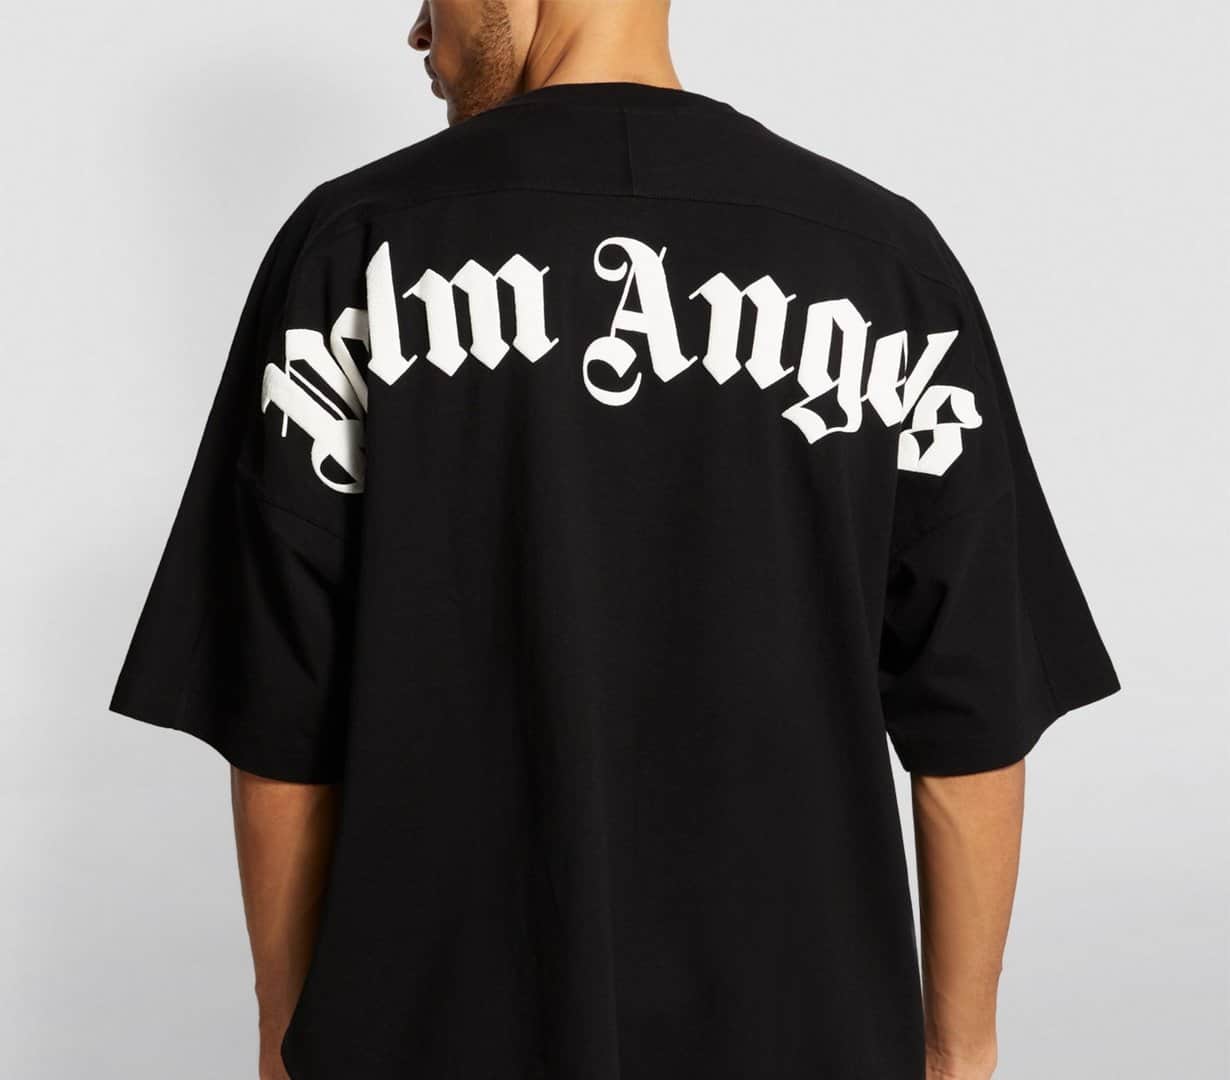 How To Spot Fake Palm Angels Oversized Logo Tee - Legit Check By Ch